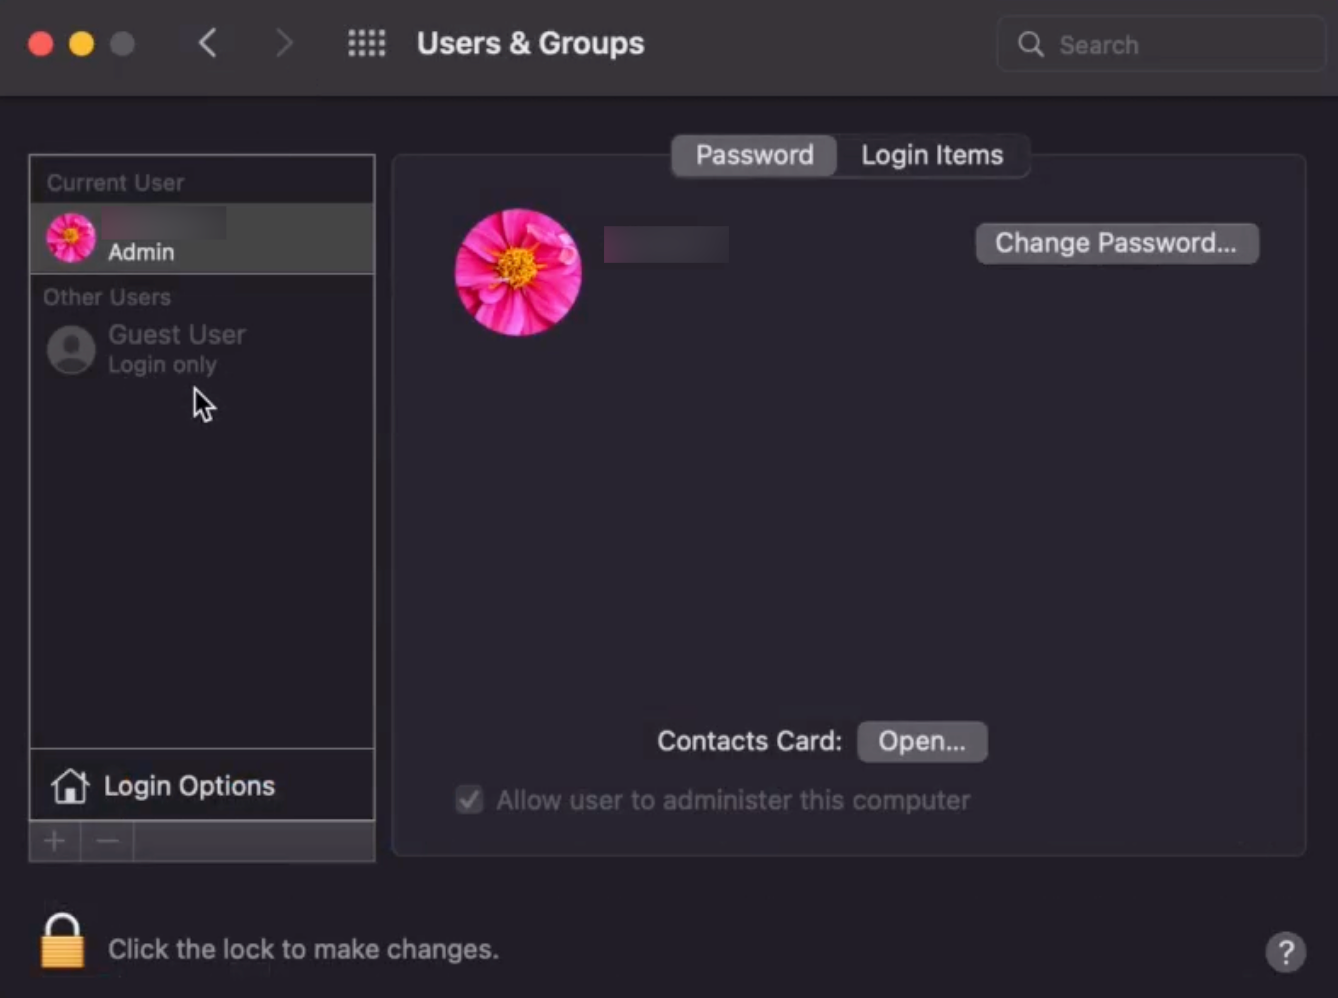 The Guest User status will change from 'Off' to 'Login only' in the Users & Groups preferences